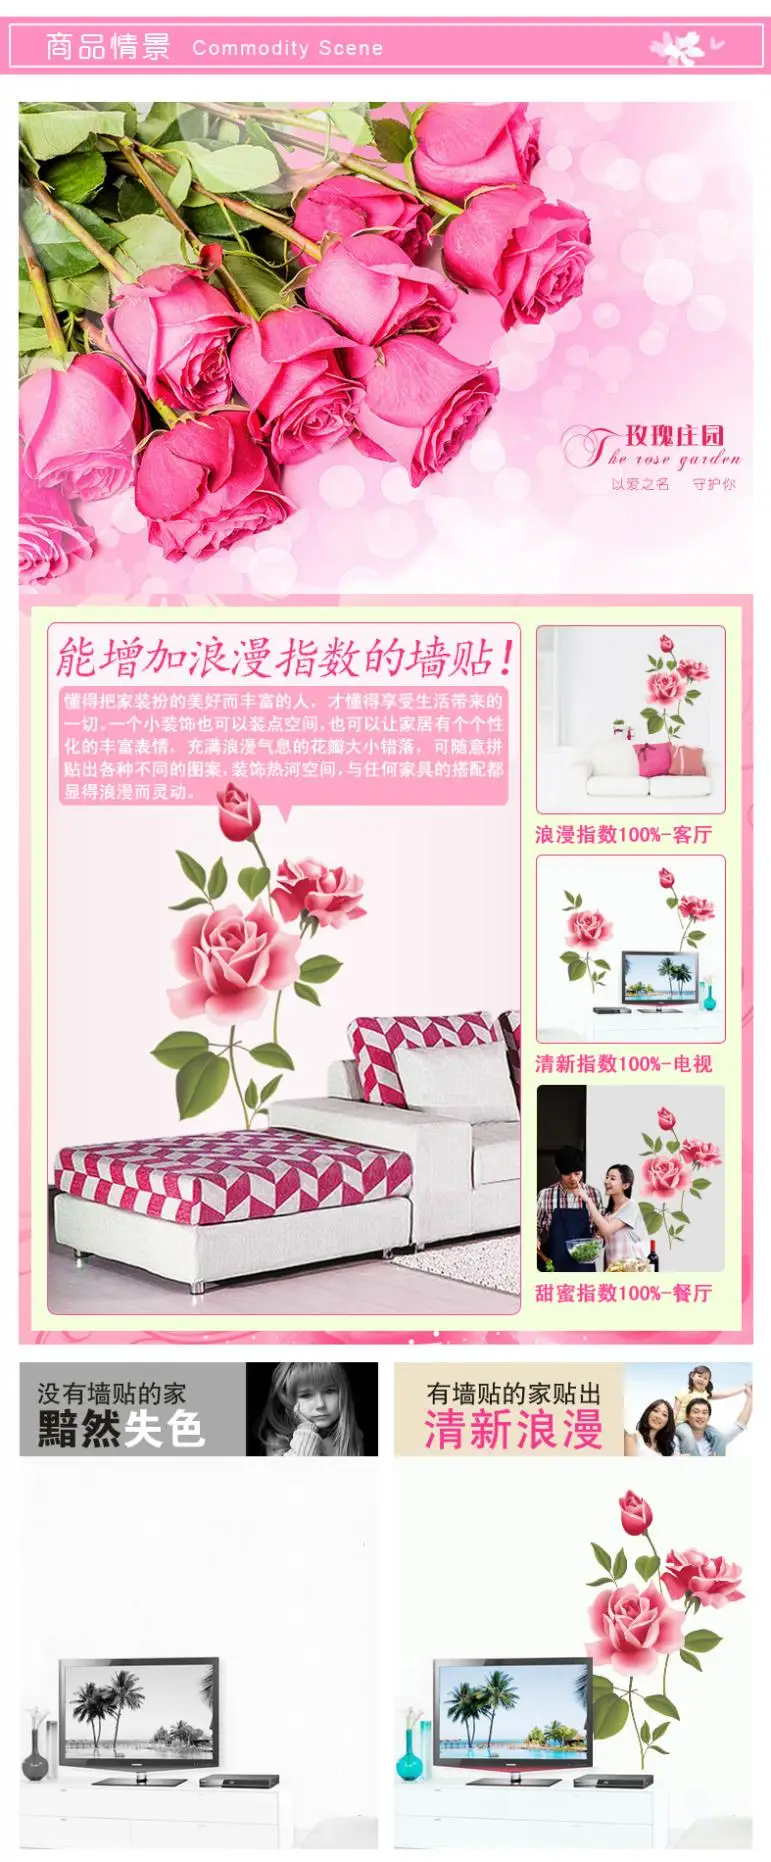 3D Roses Flowers Blossom Wall Stickers Home Romantic Love Living Room Art Decals